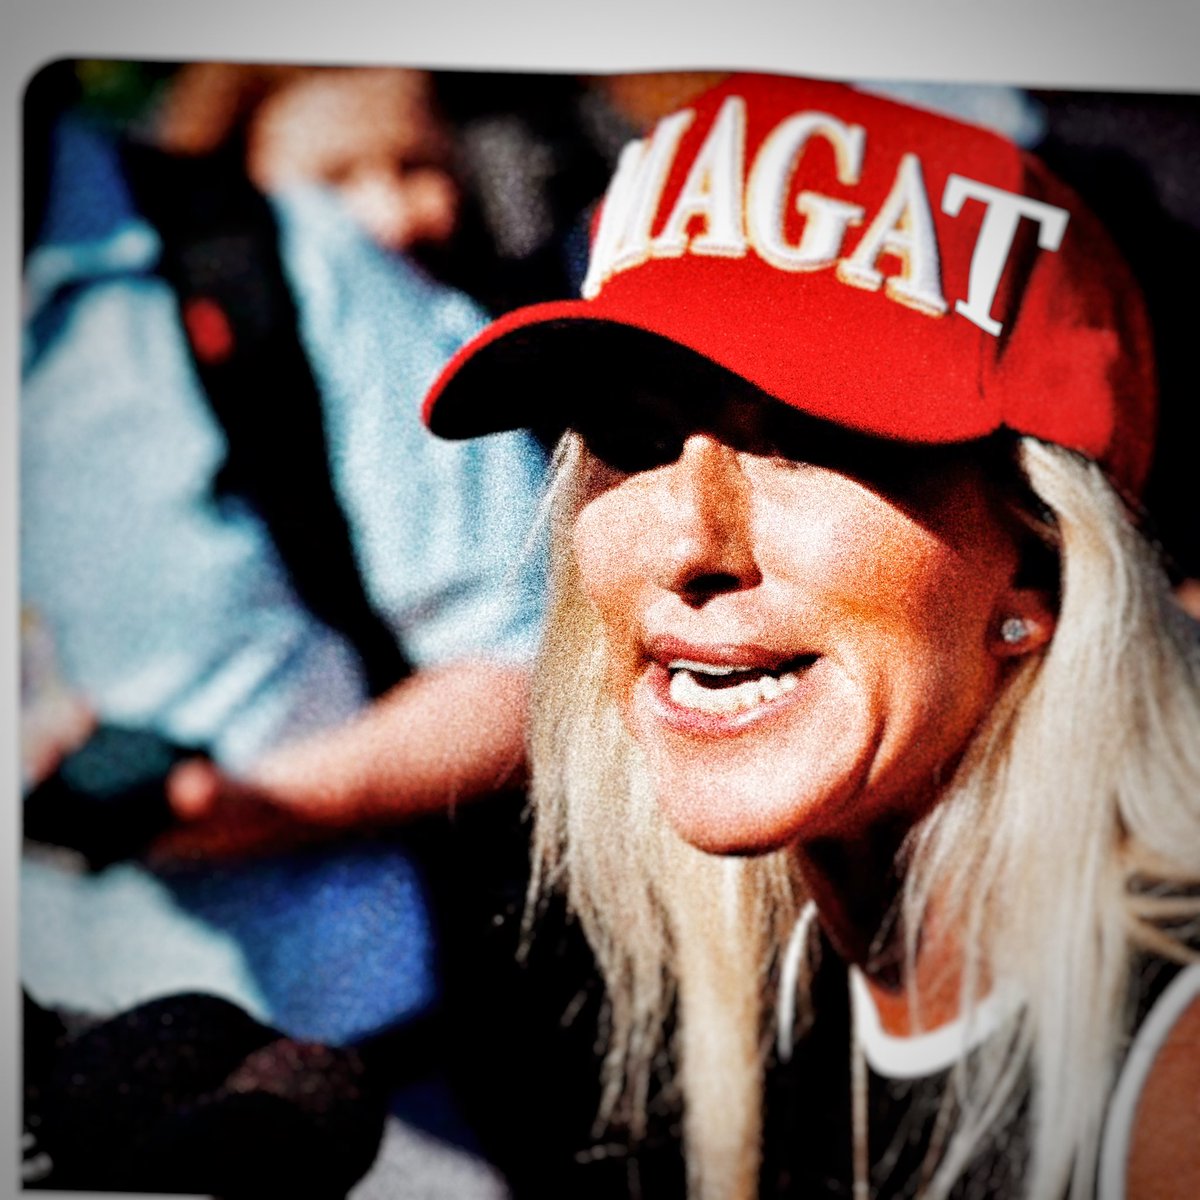 She finally got the hat right. #MoscowMarge #MoscowMarjorie #MTG #MAGA2024 #MAGAT